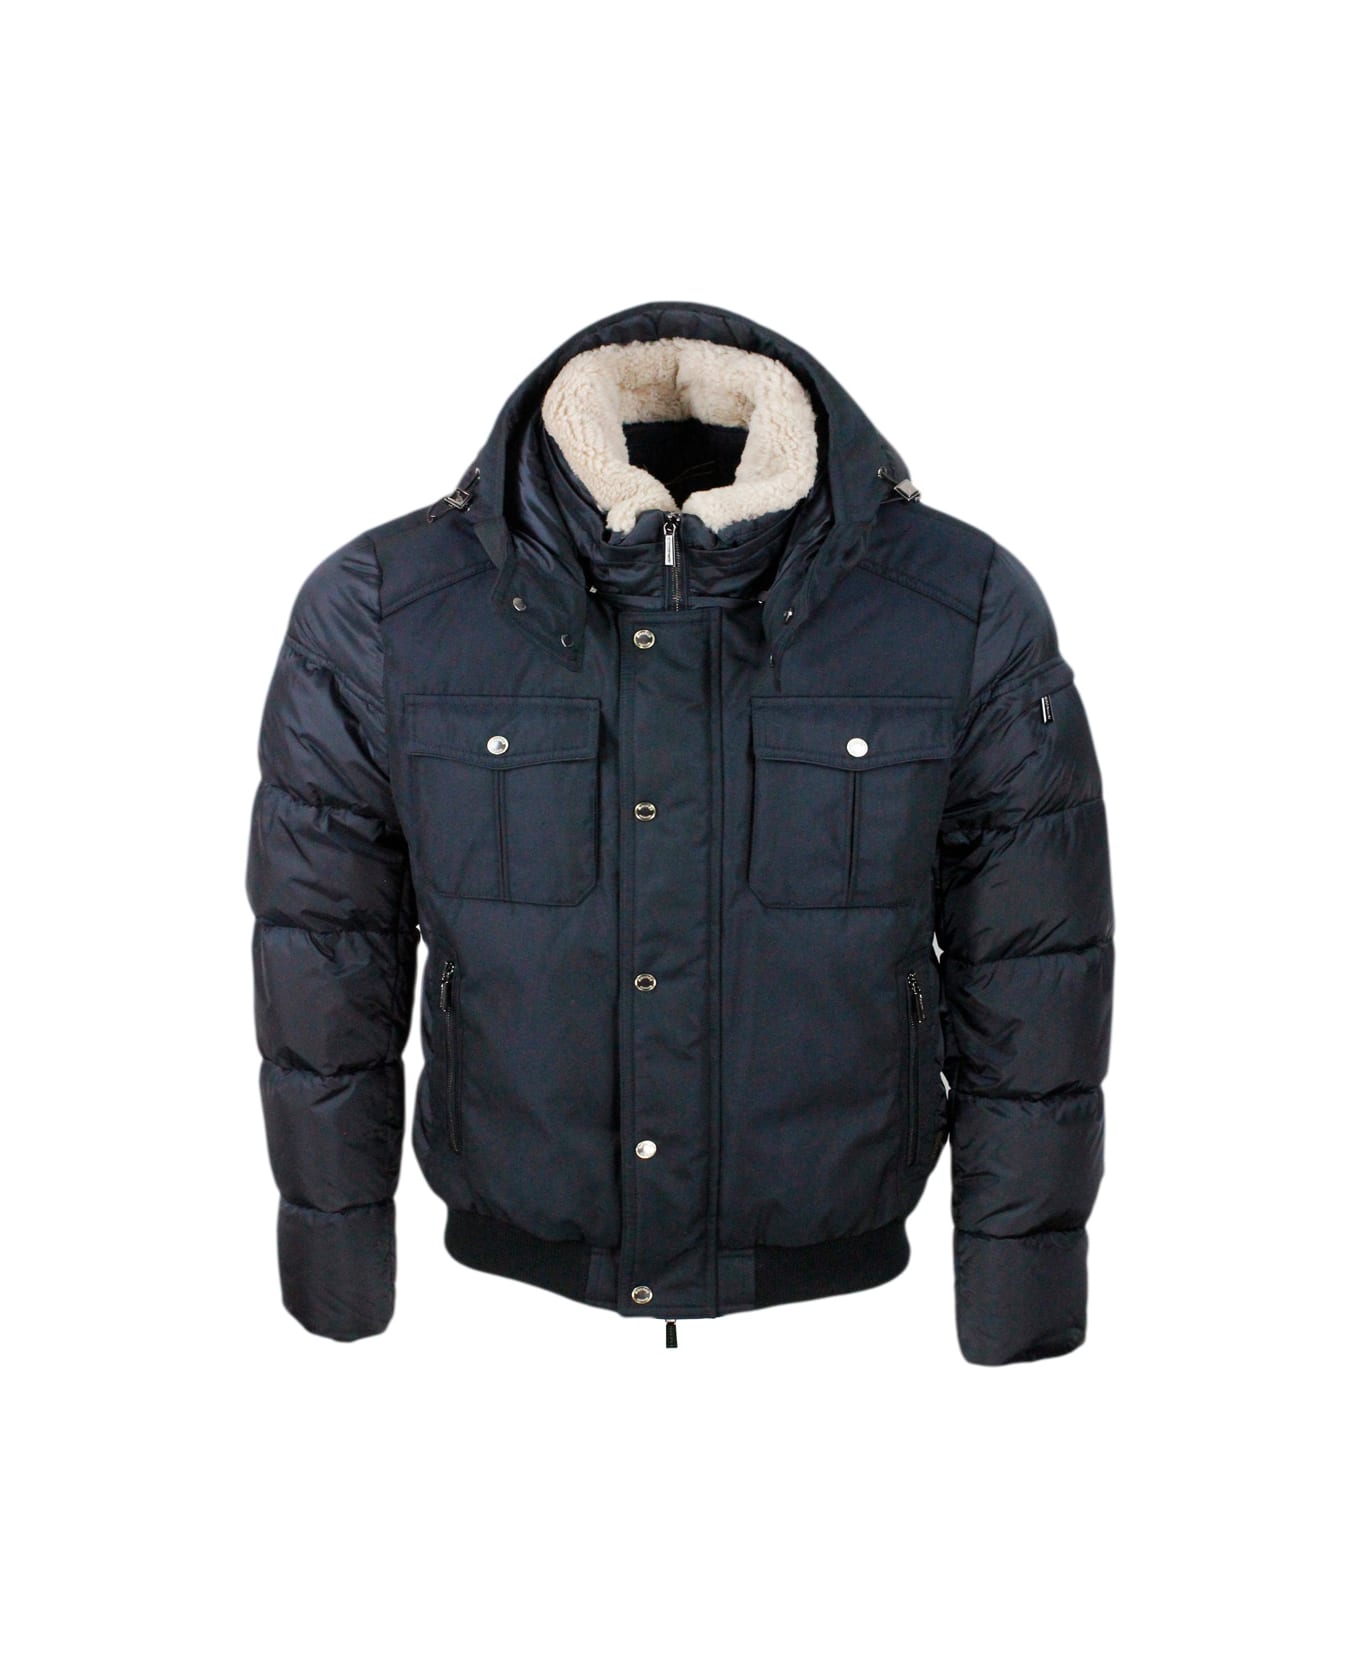 Moorer Bomber Jacket Padded With Goose Feathers With Removable Hood And Collar In Curly Sheepskin, Front And Shoulders In Material, Closure With Zip And Butt - Blu